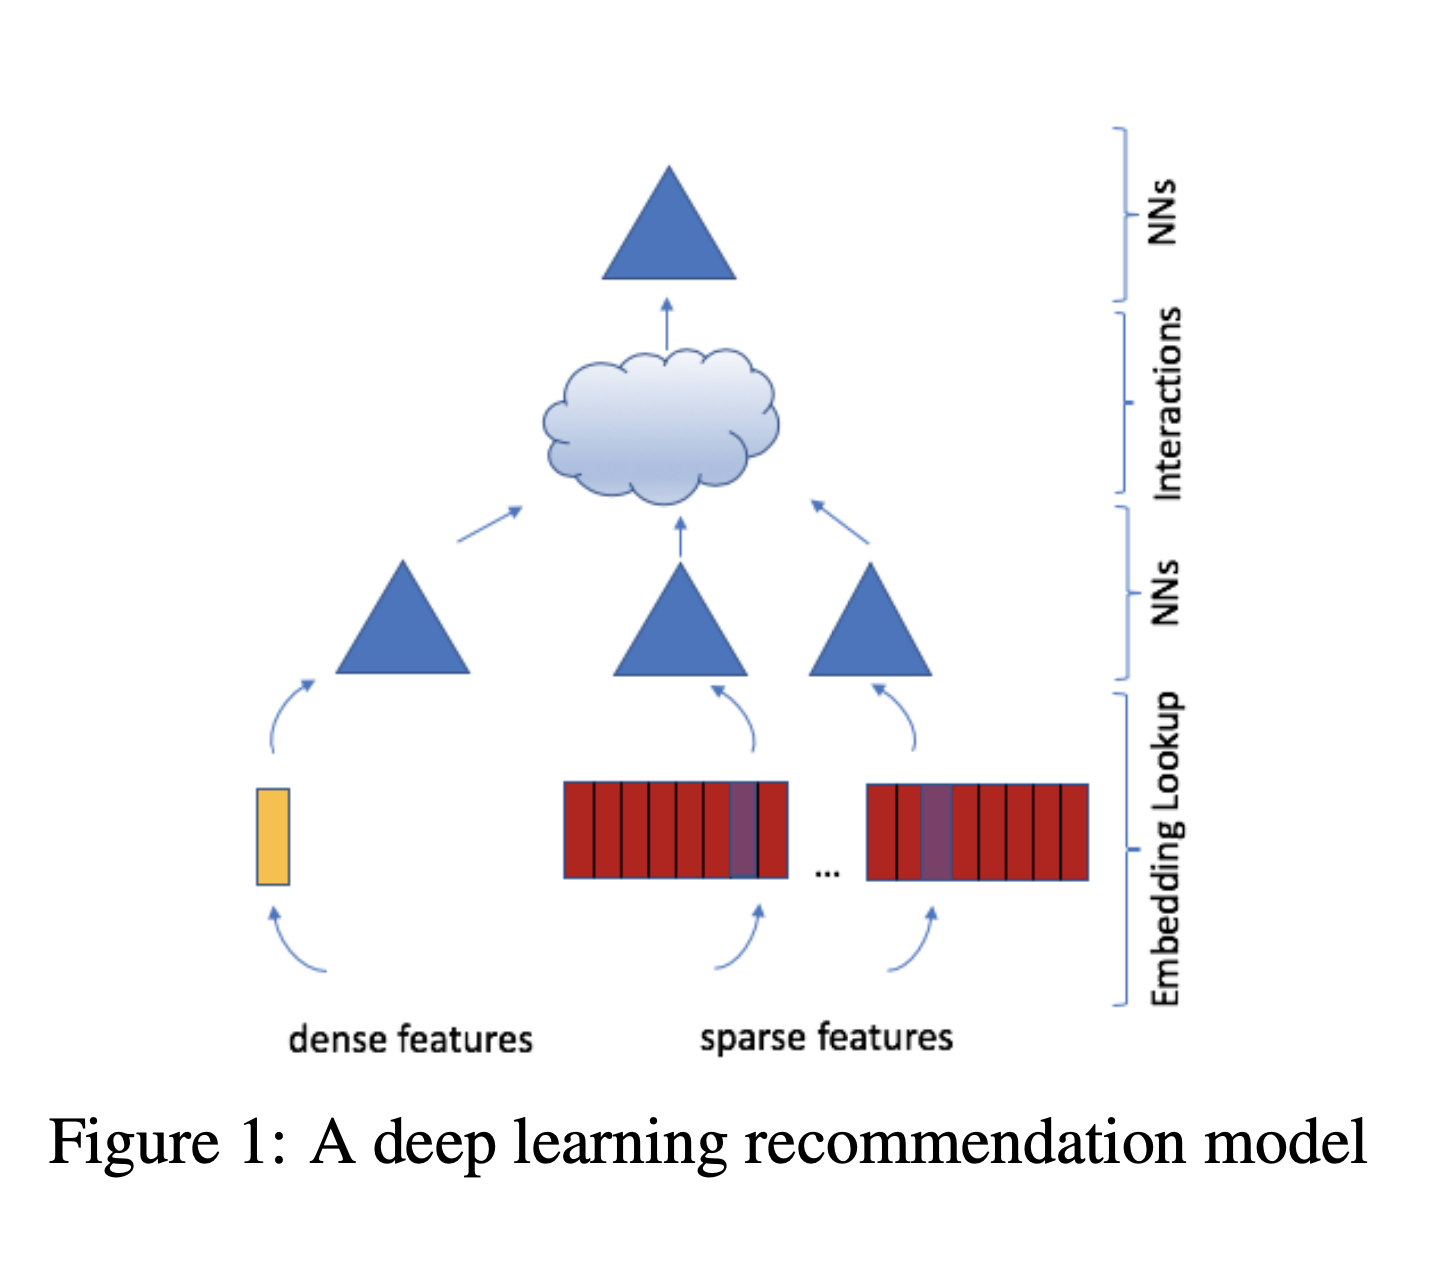 A deep learning recommendation model